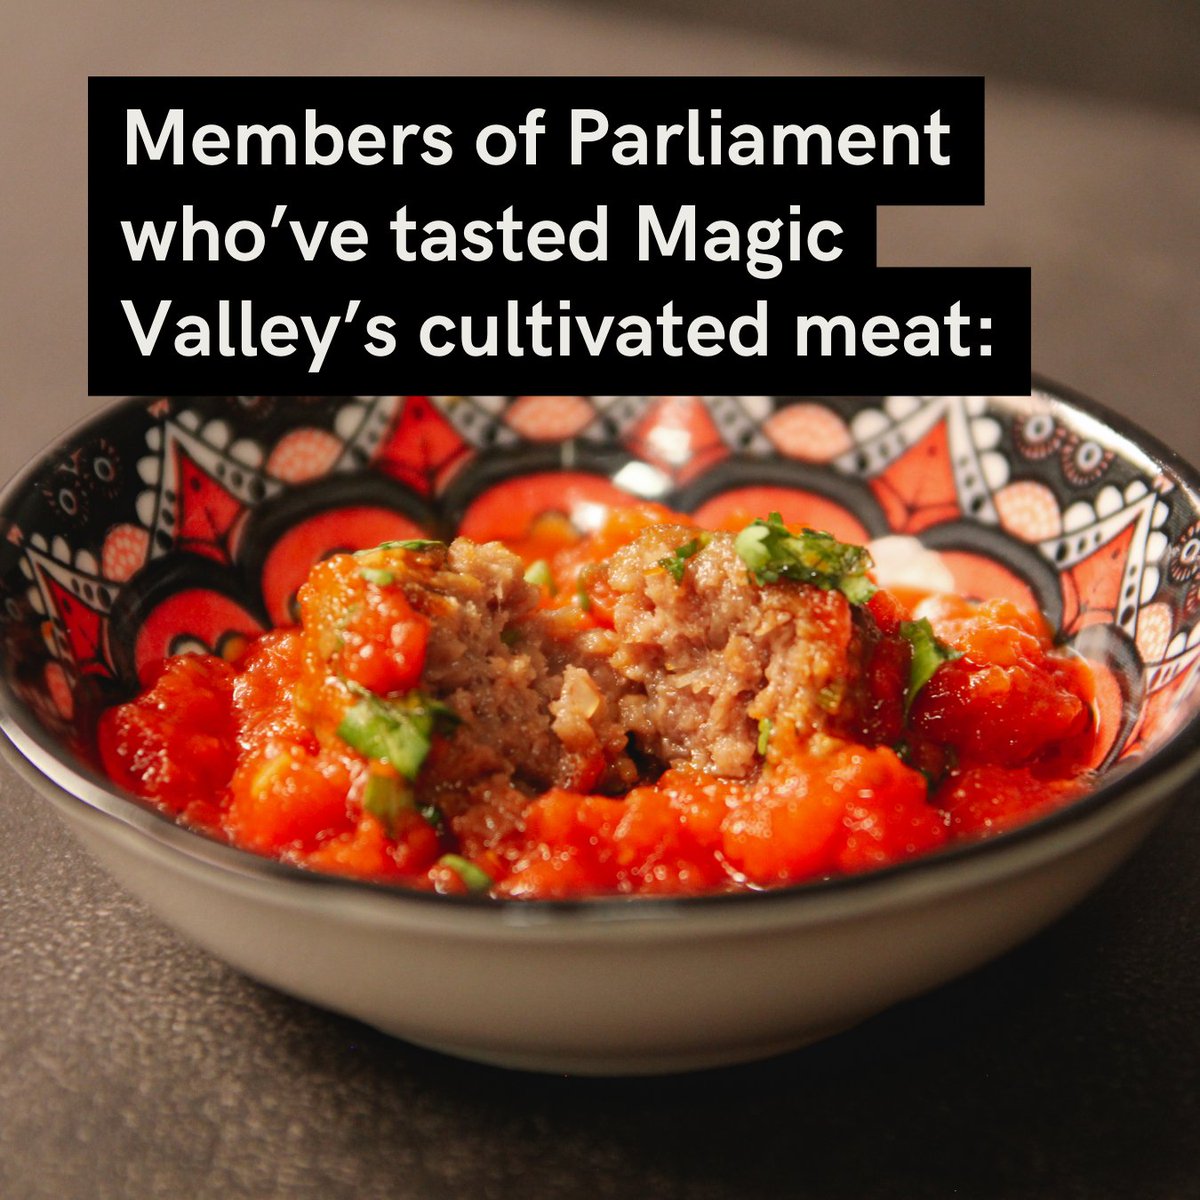 These are the Members of Parliament who’ve tasted Magic Valley’s #cultivatedmeat - and what they had to say about the experience! We’re very grateful for the support of these leaders and very excited for the future of #foodtechnology and #innovation in Australia 🌱🥩